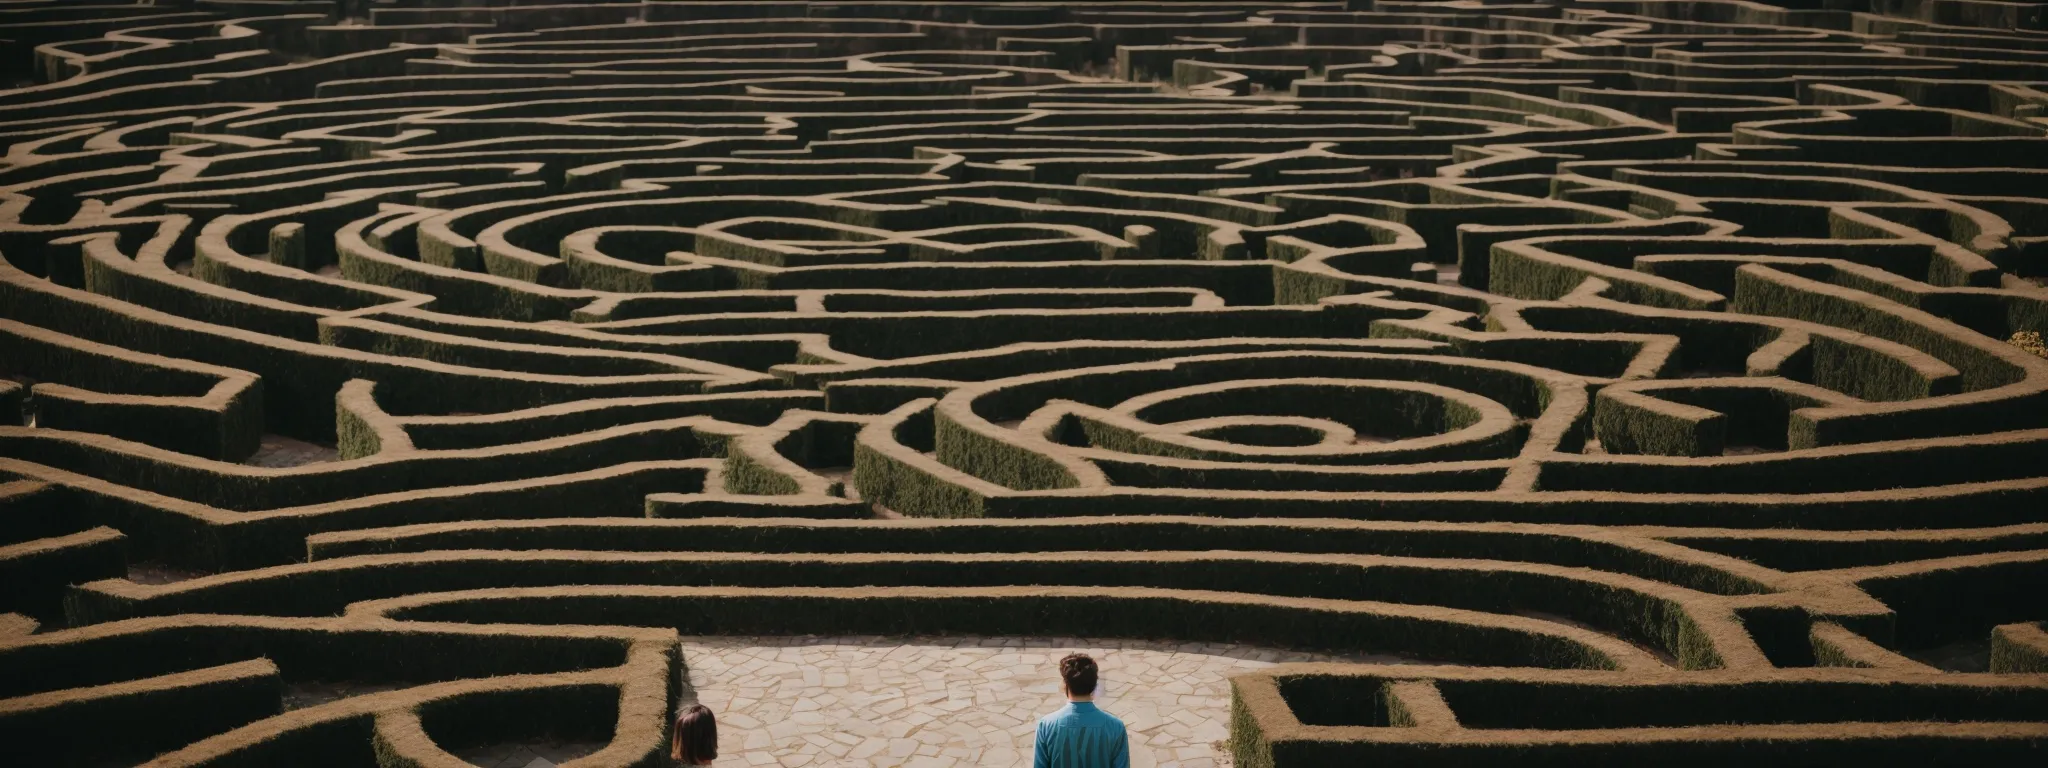 a person stands at the entrance of a complex maze looking out over the intricate pathways, plotting an escape strategy. 